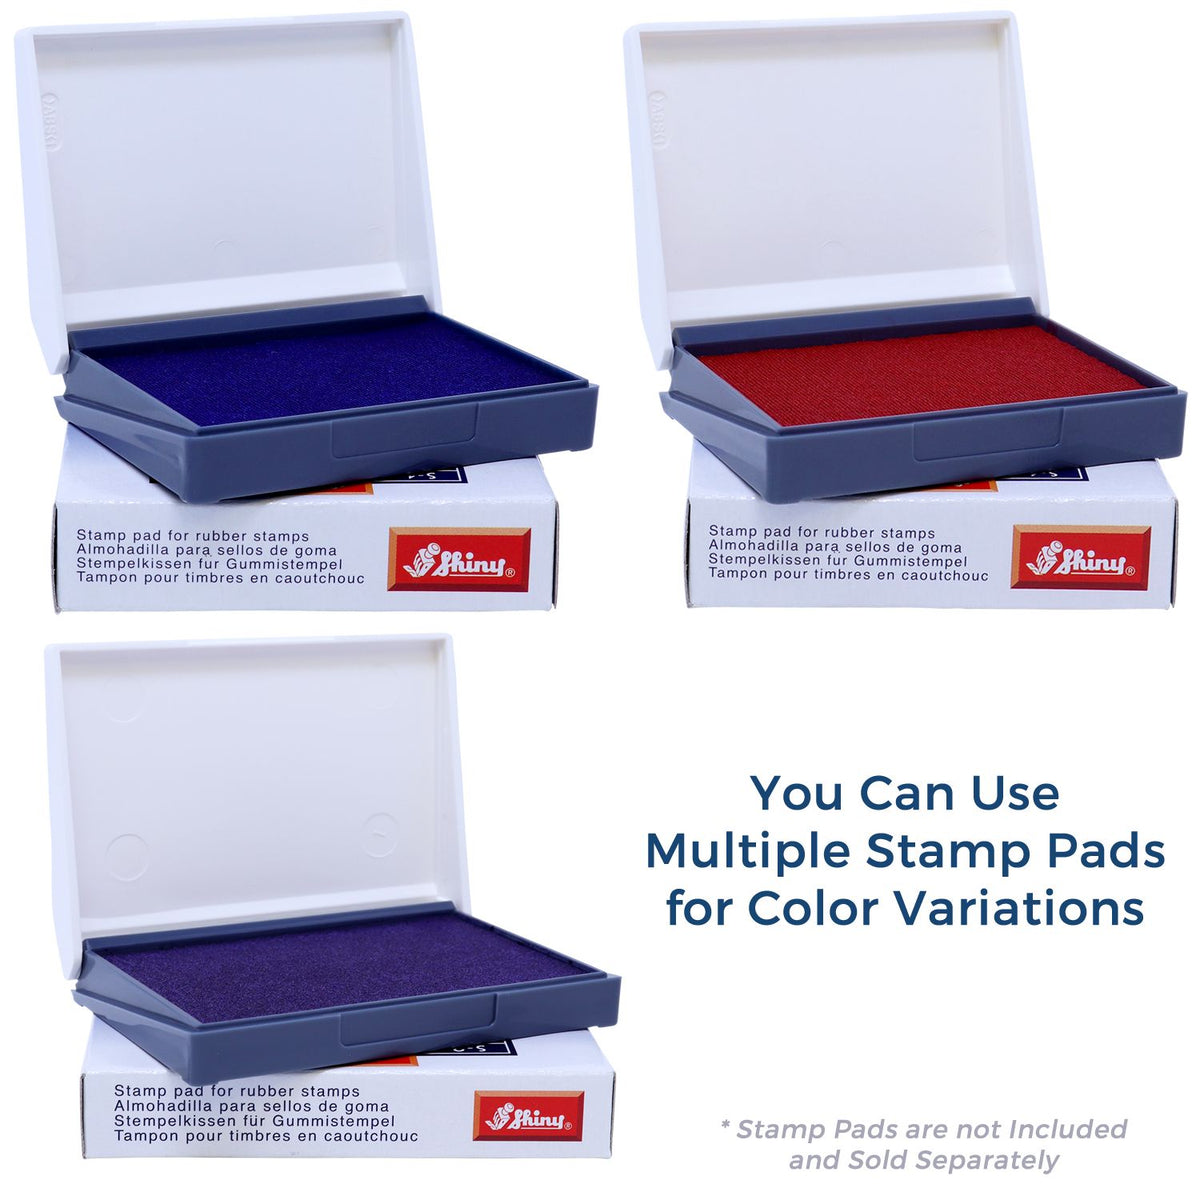 A picture showing the different ink colors or hues available for the Wooden Handle Rhode Island Rectangular Notary Public Stamp product.